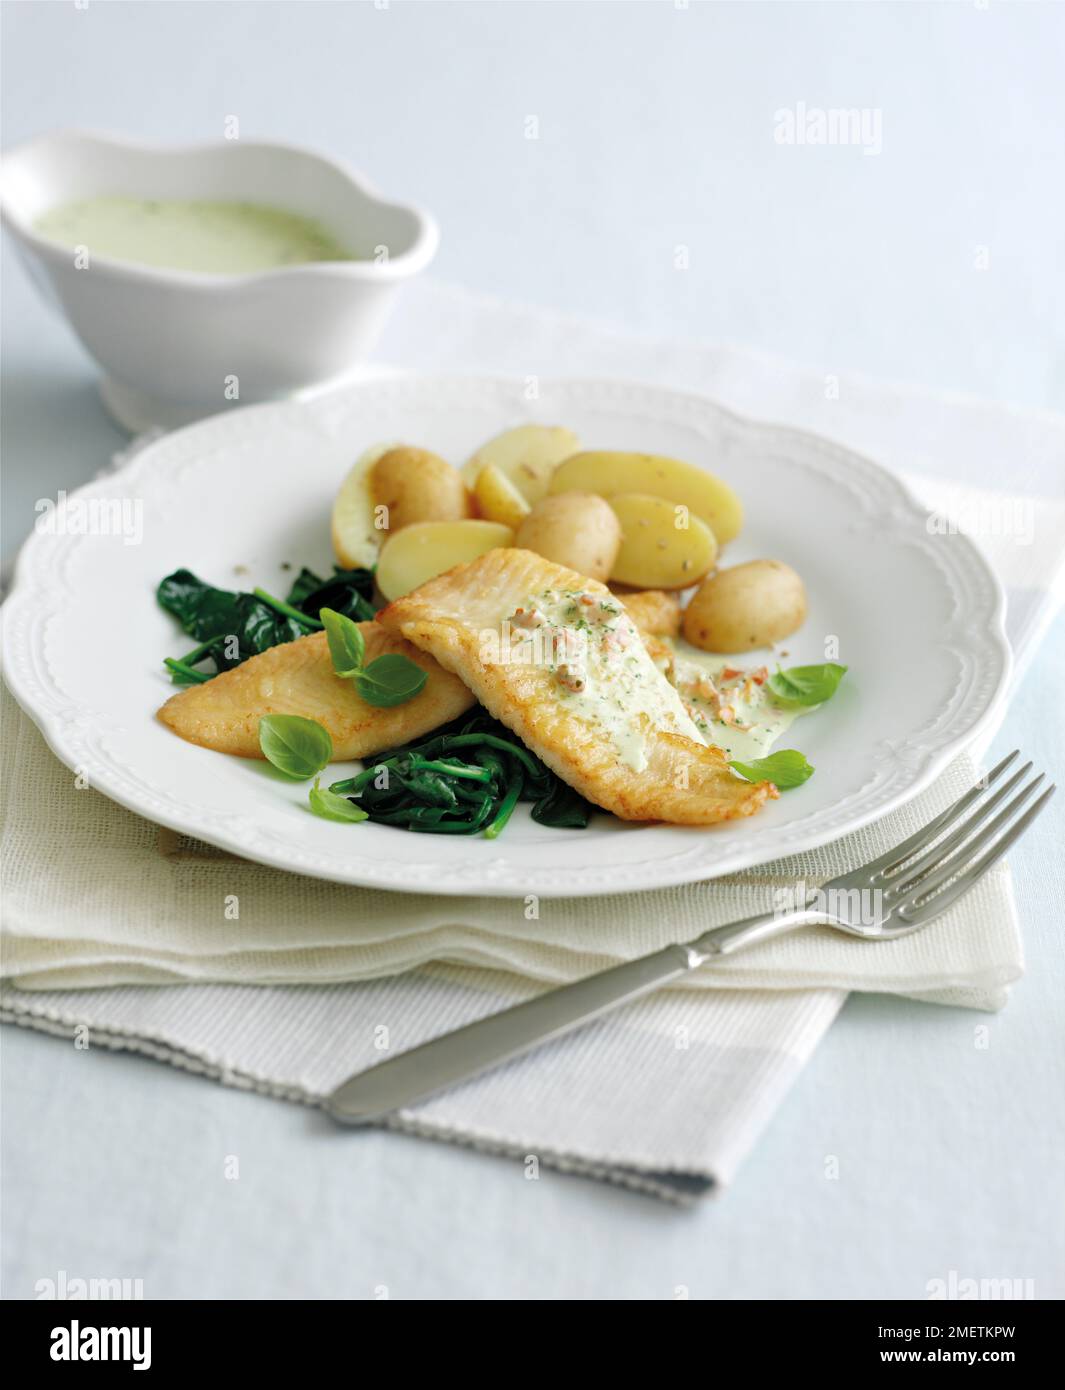 Sole fillets with creamy pesto sauce on bed of spinach, with basil leaves and boiled potatoes Stock Photo